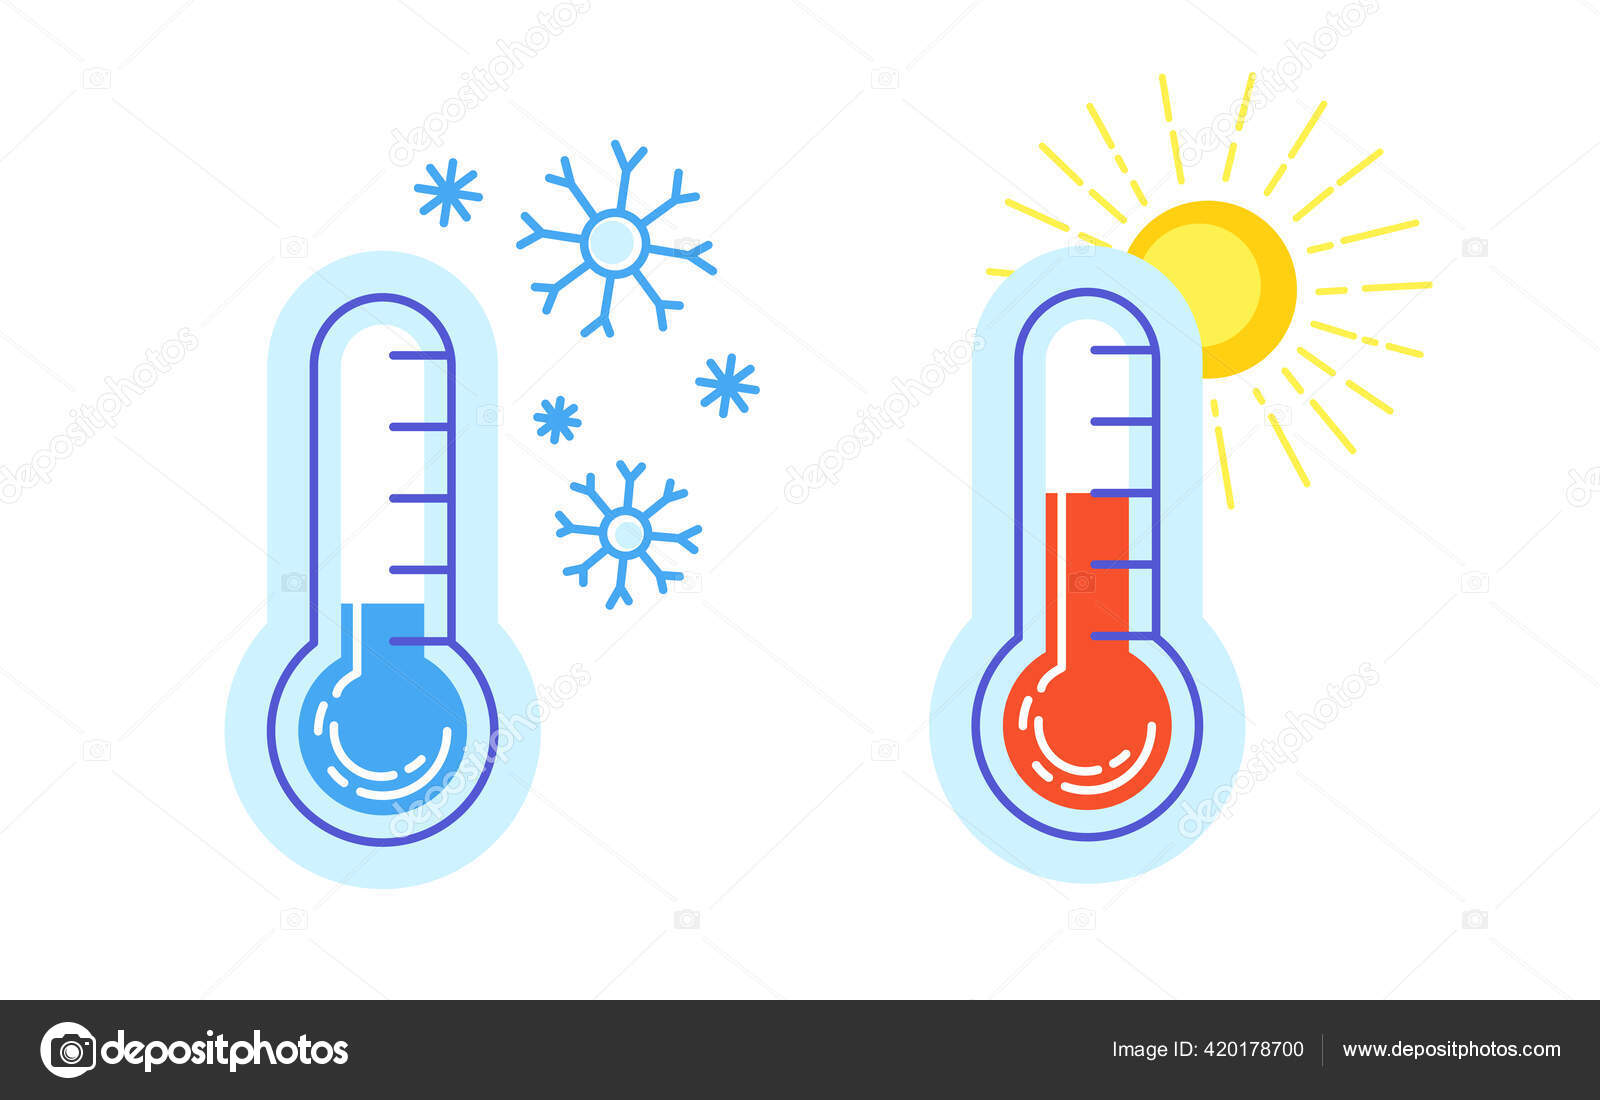 https://st2.depositphotos.com/8609712/42017/v/1600/depositphotos_420178700-stock-illustration-hot-and-cold-icon-thermometer.jpg